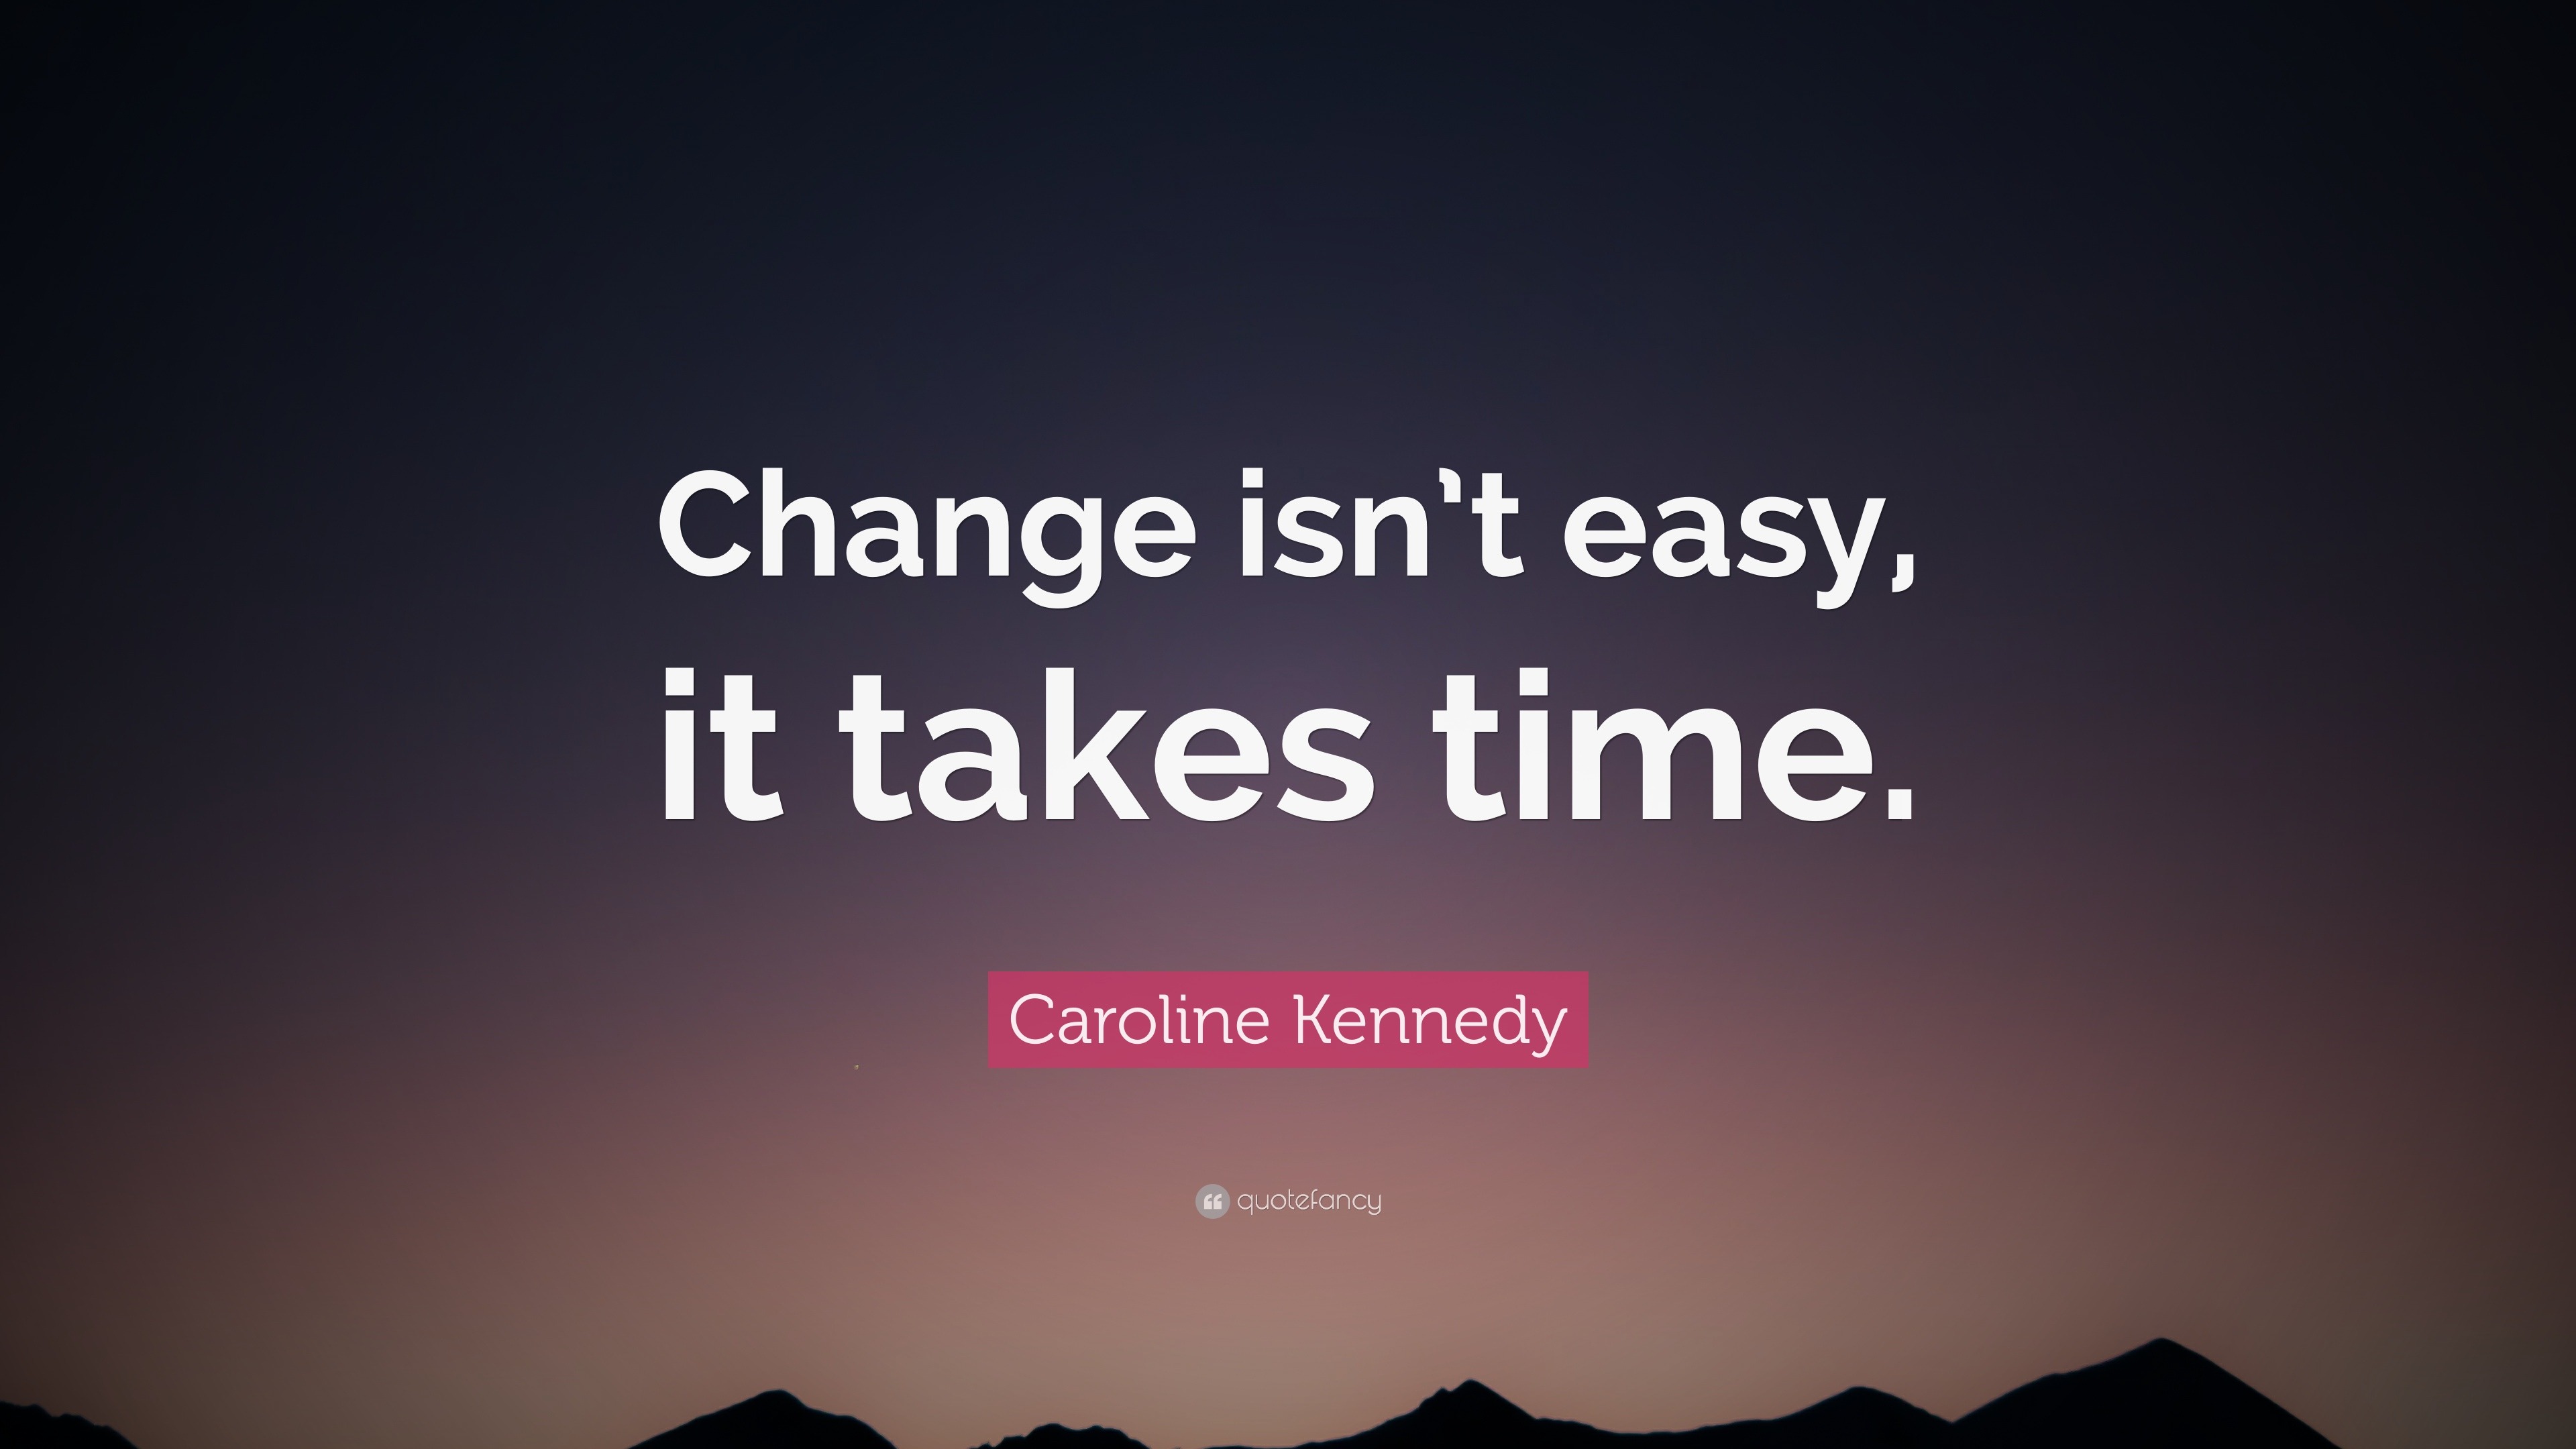 Caroline Kennedy Quote “Change isn’t easy, it takes time.” (12